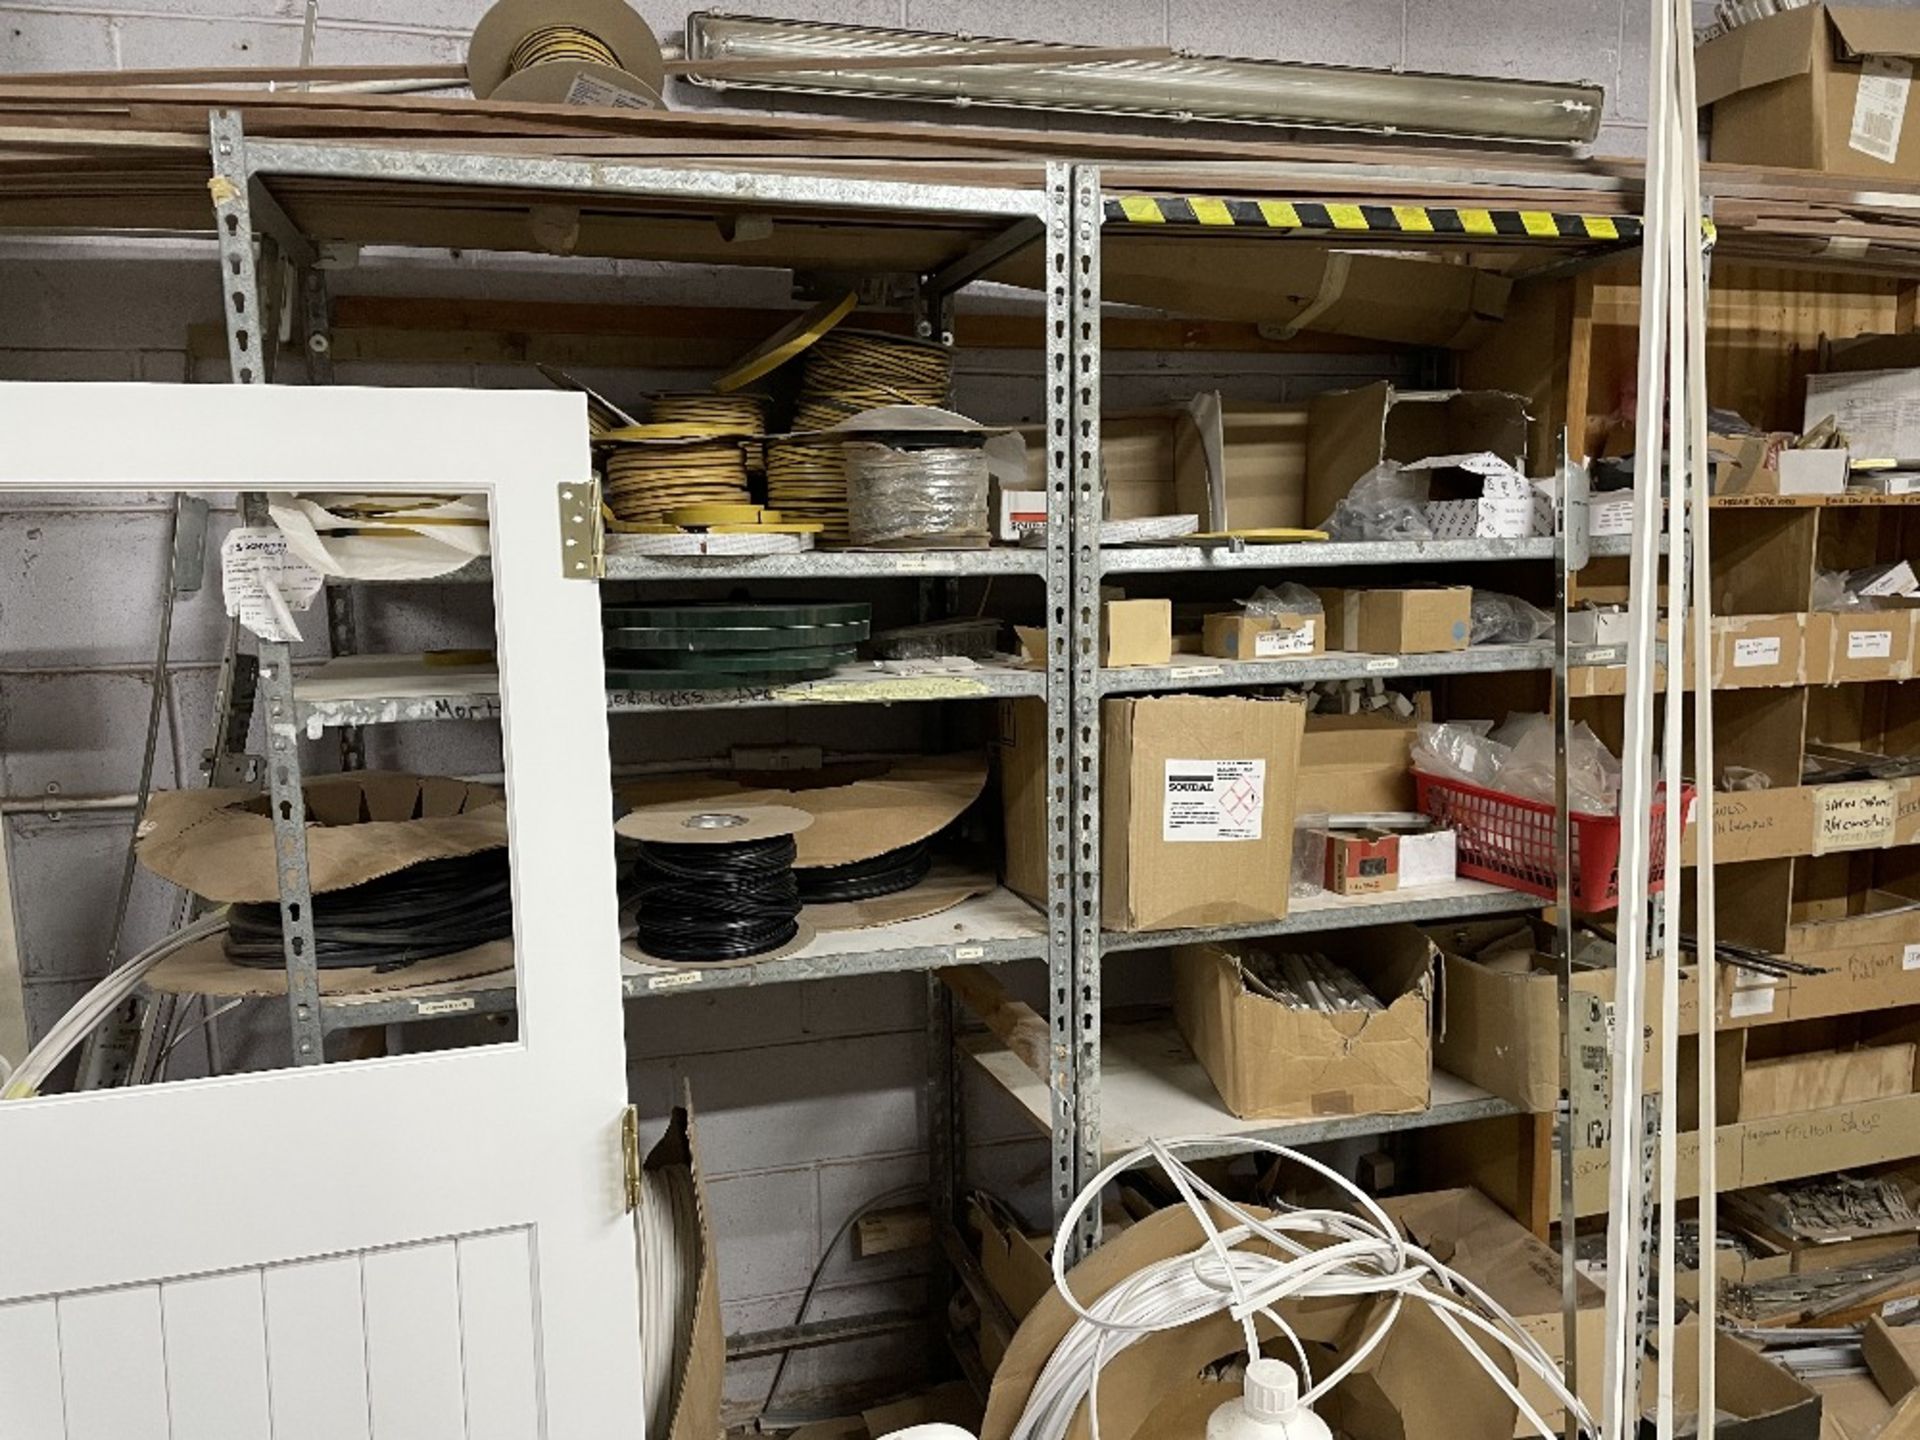 5 x Shelving Units w/ Contents - Contents Incl: Edging Material, Lockings & Hinges - Image 2 of 10